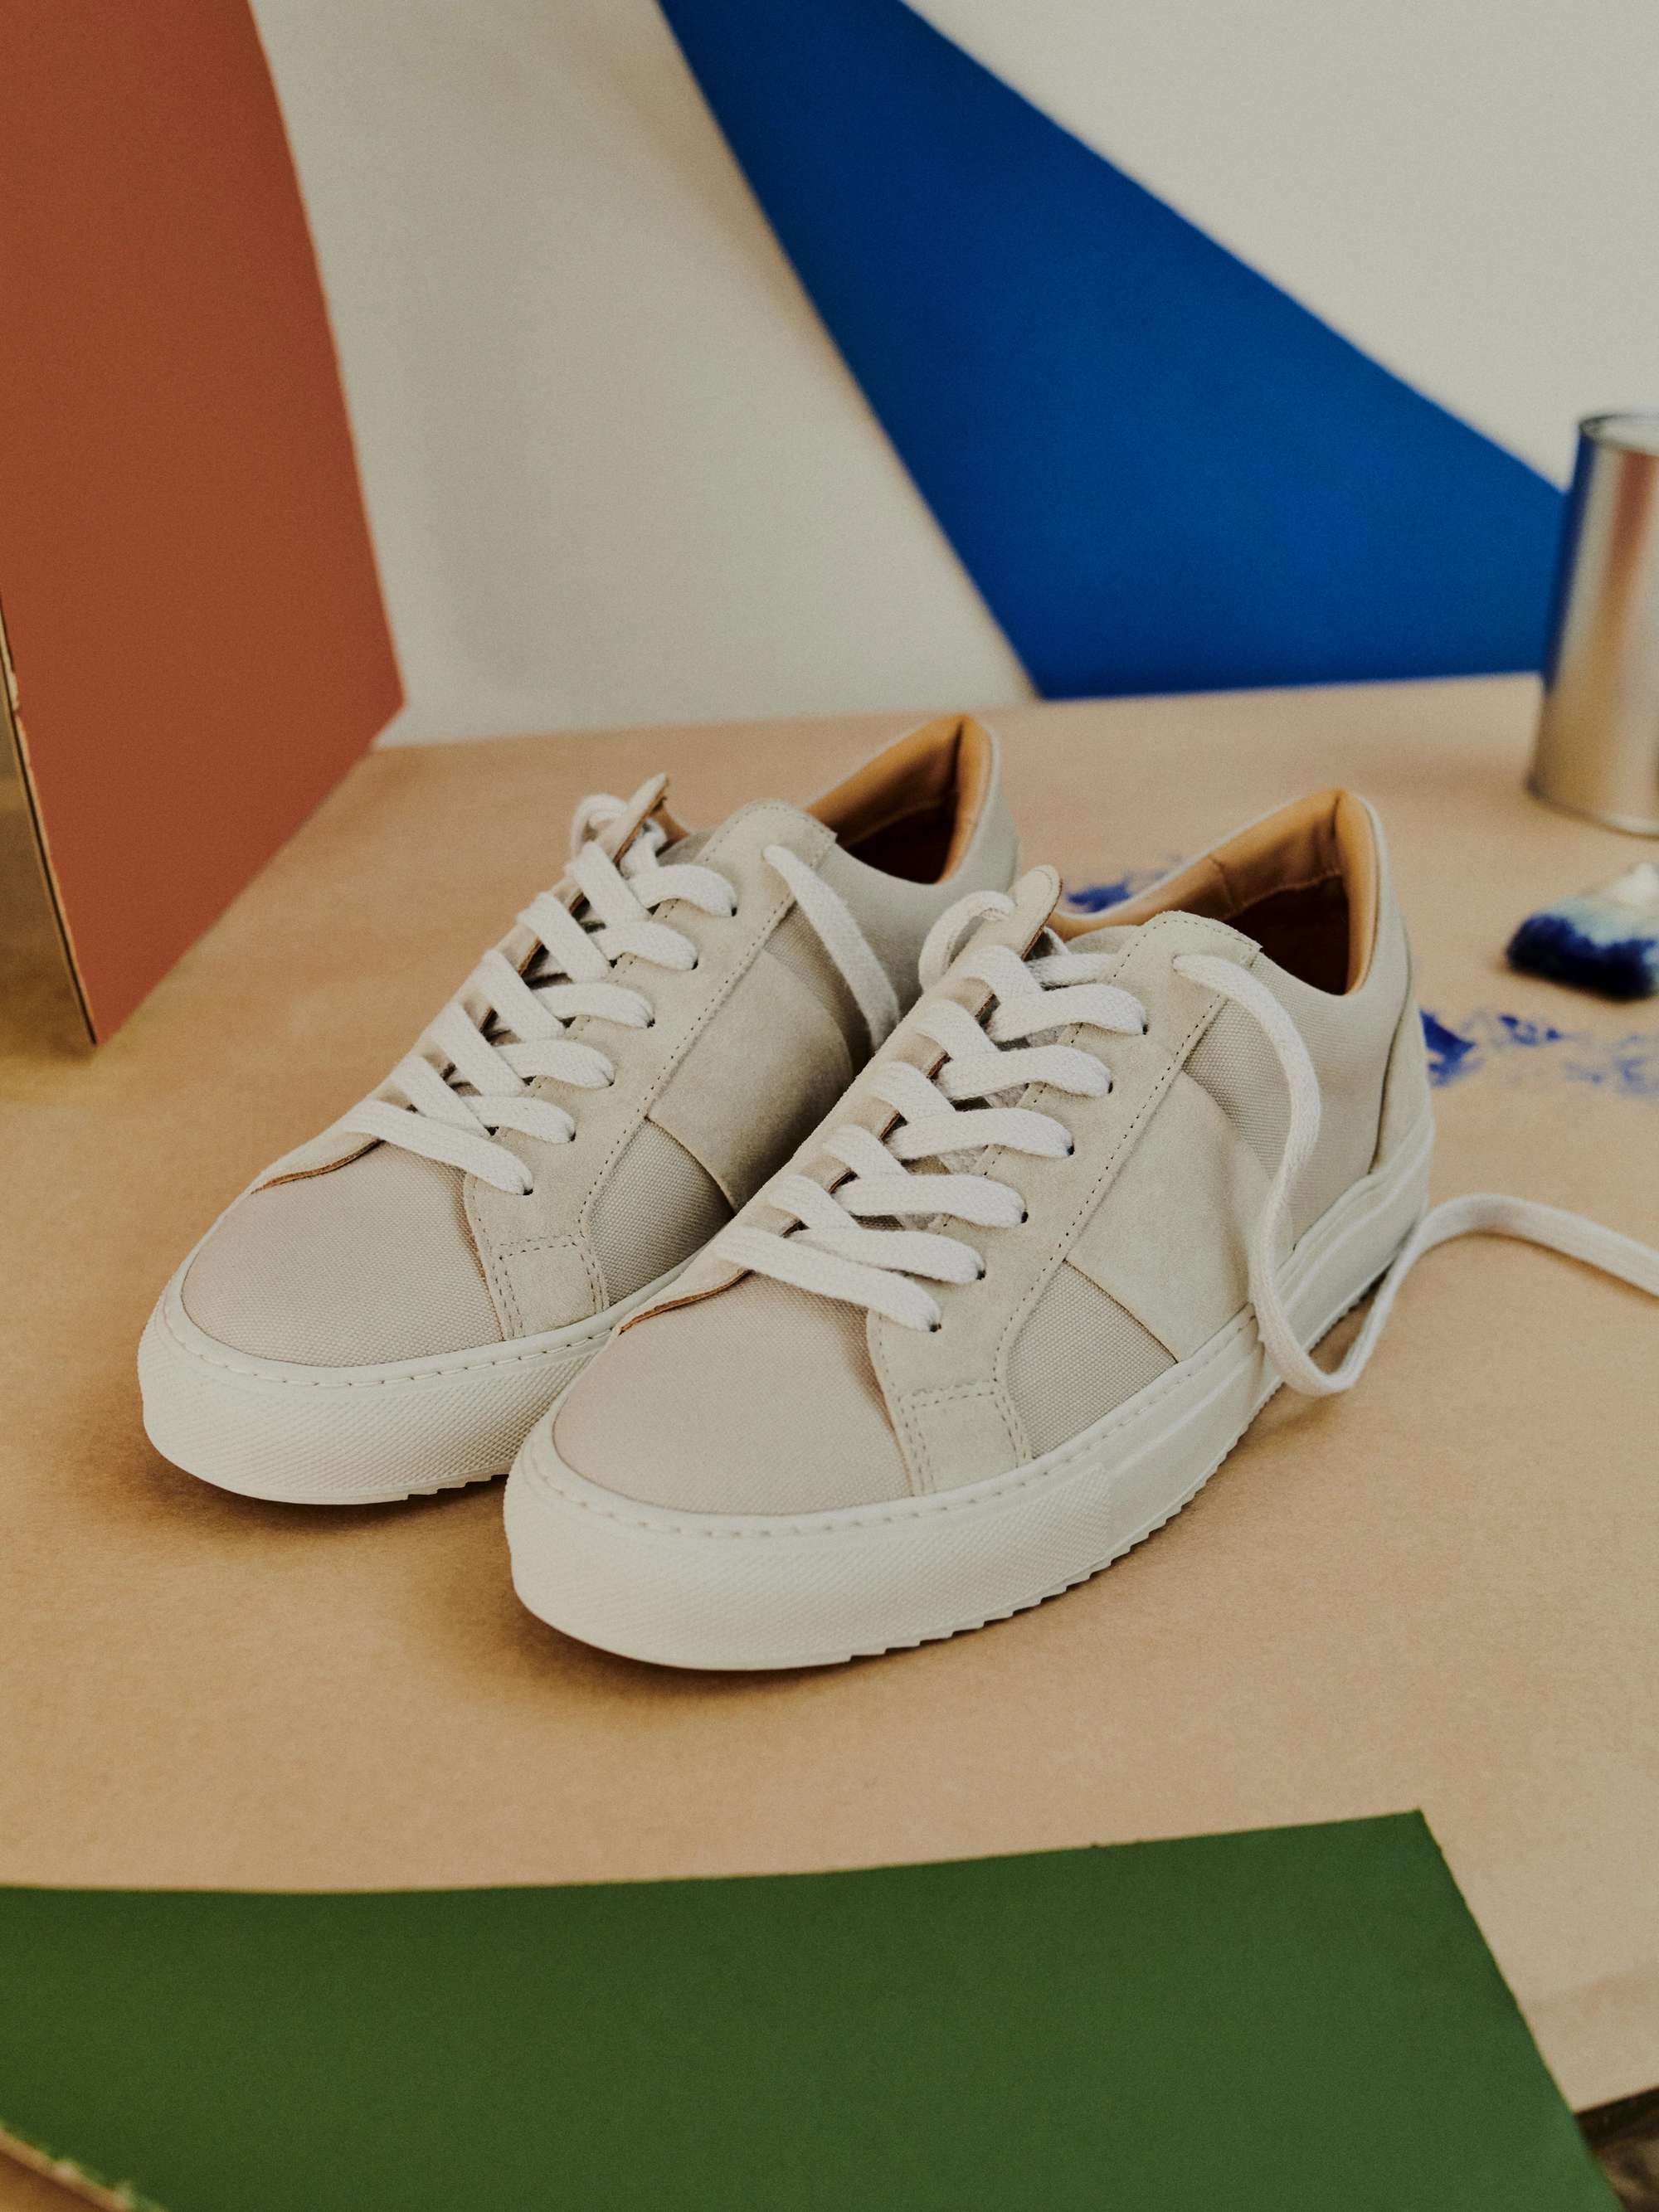 MR P. Suede-Trimmed Canvas Sneakers